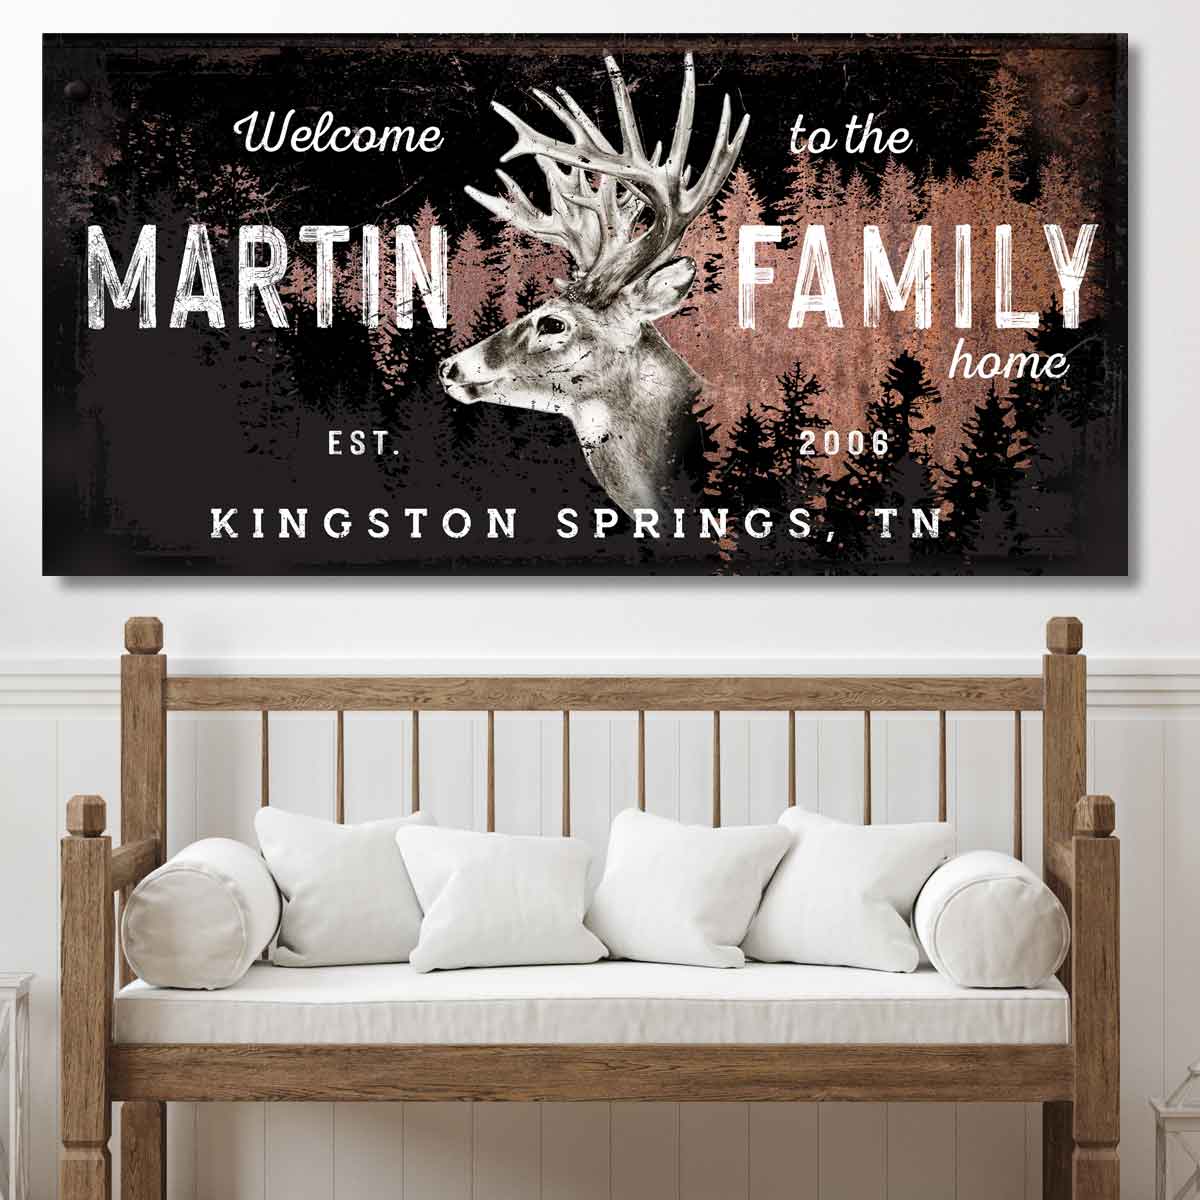 Deer Head art with personalized name for a Rustic Deer Themed Living Room on canvas or metal Personalized [name] Family sign  with Deer head in woods. On Black Background with deer in wooded area in foreground